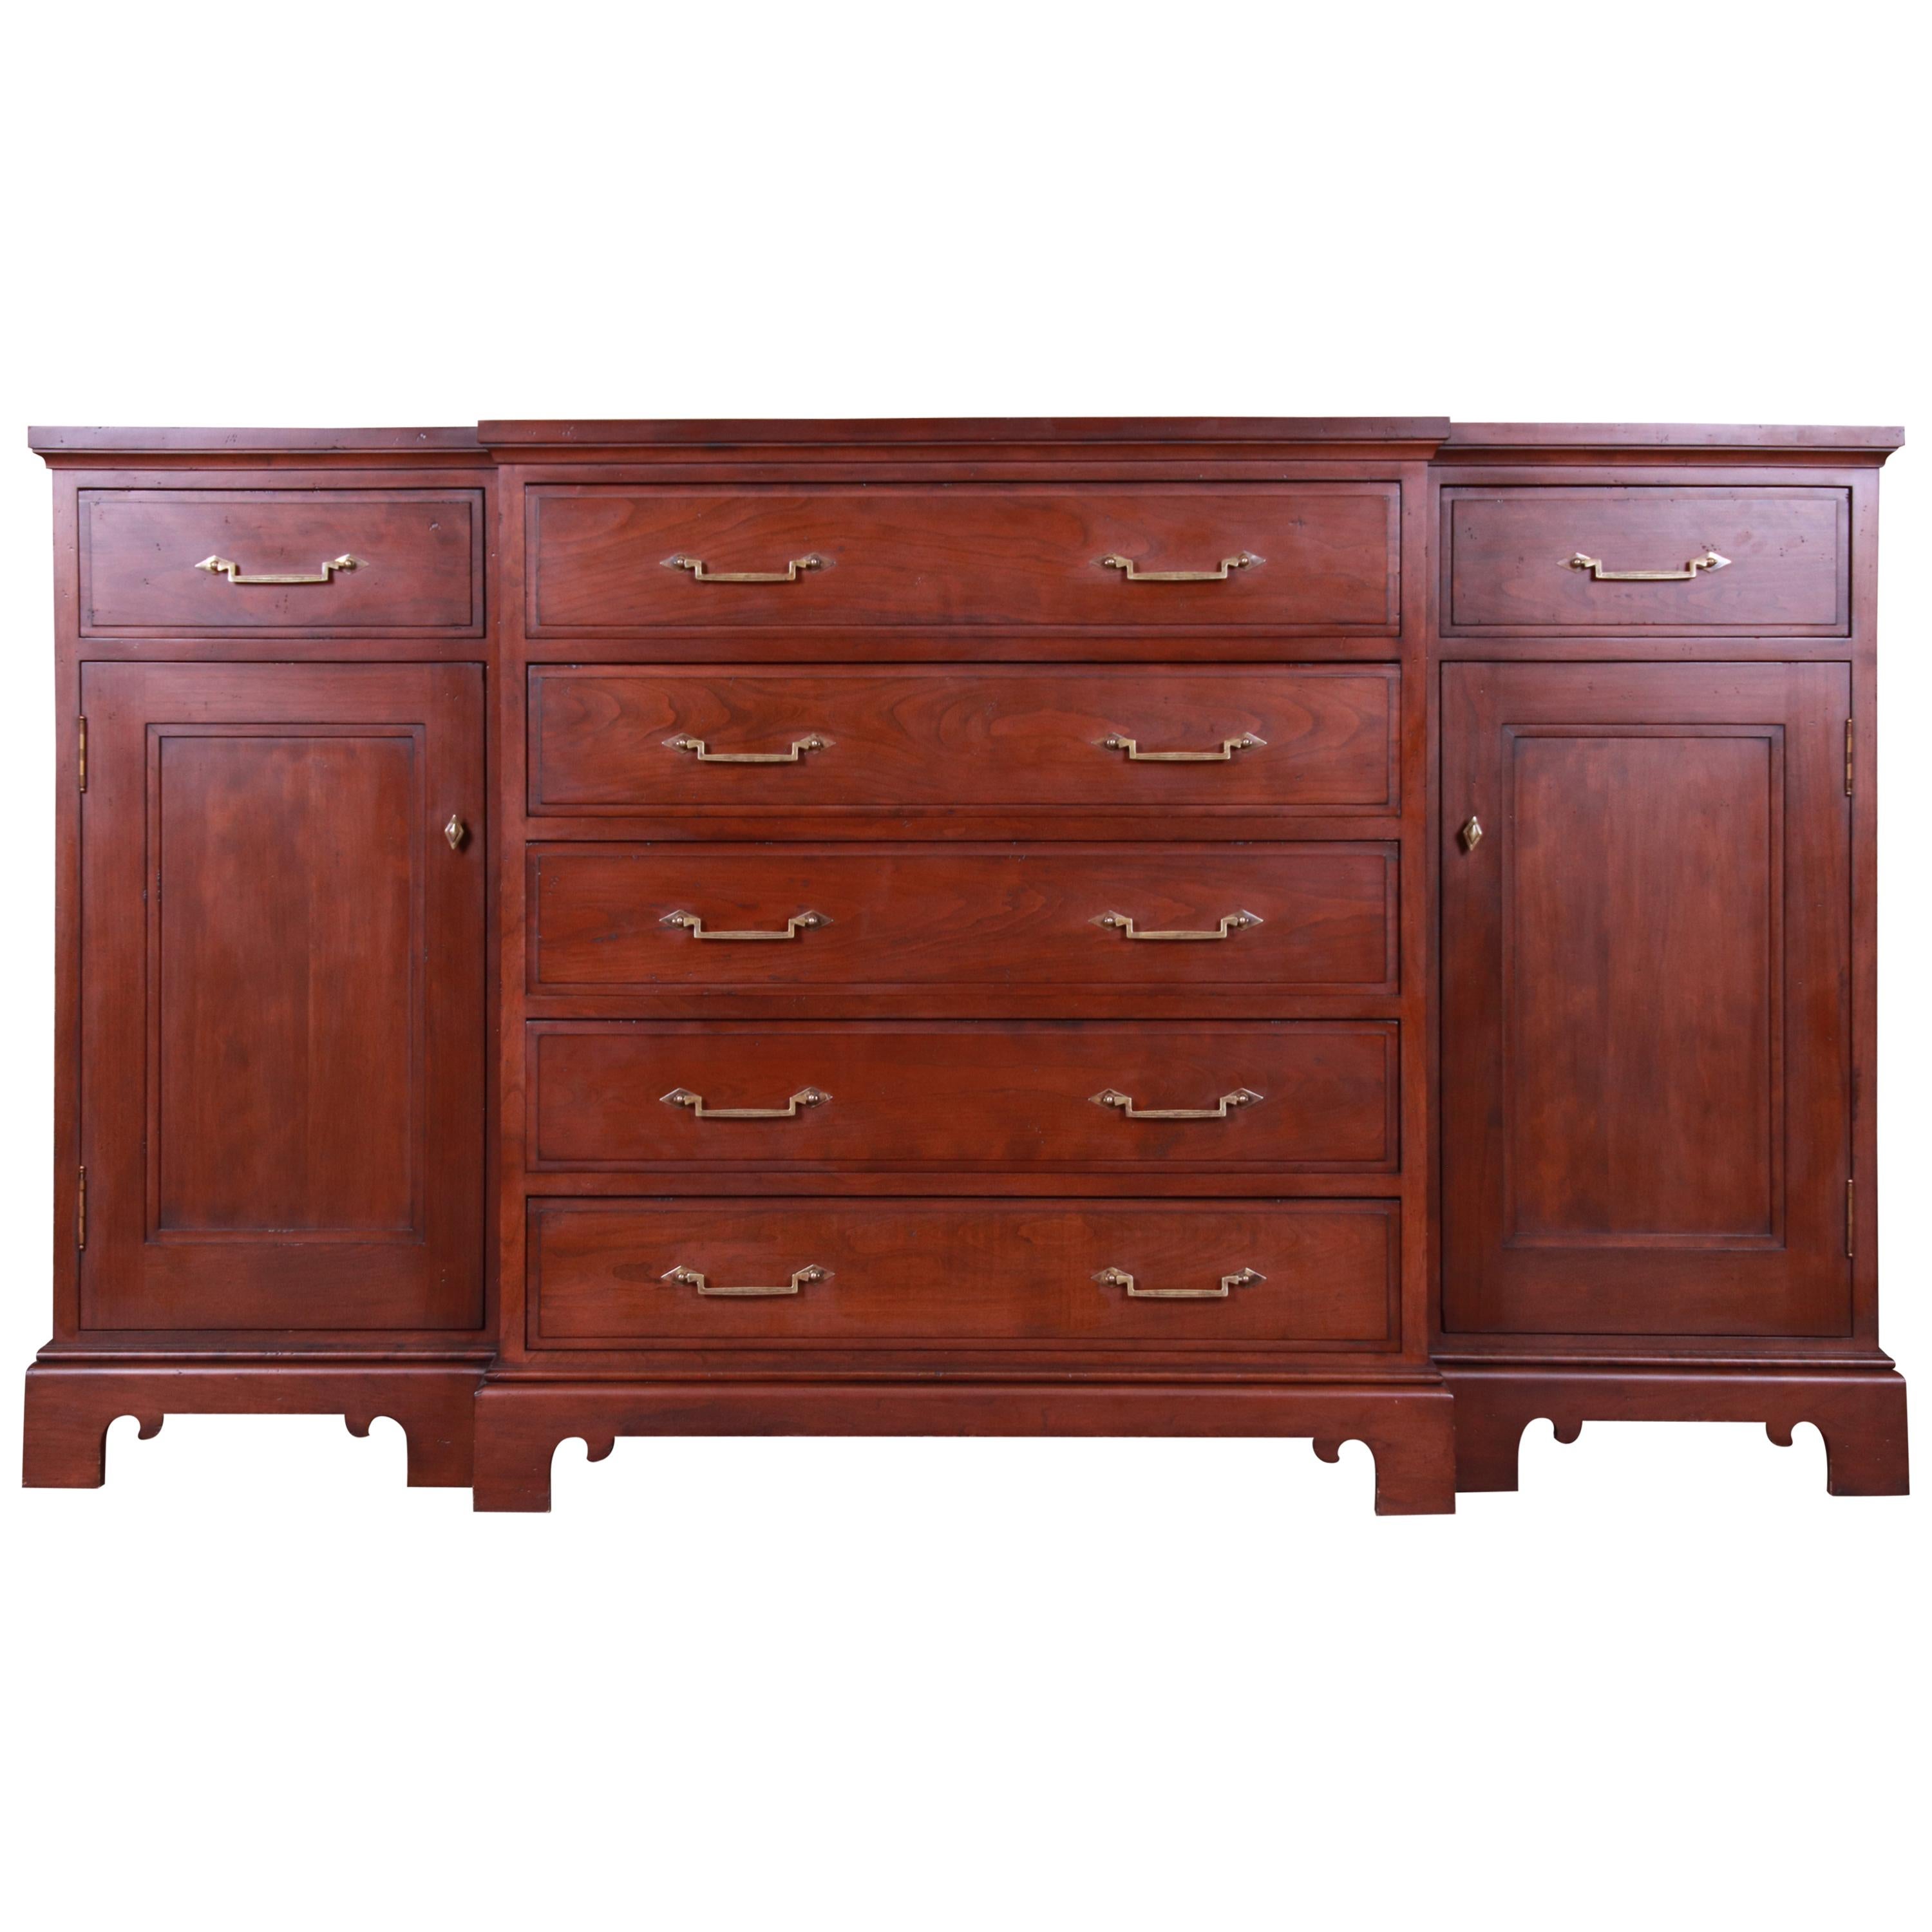 French Provincial Solid Mahogany Marble Top Sideboard Attributed to Grange